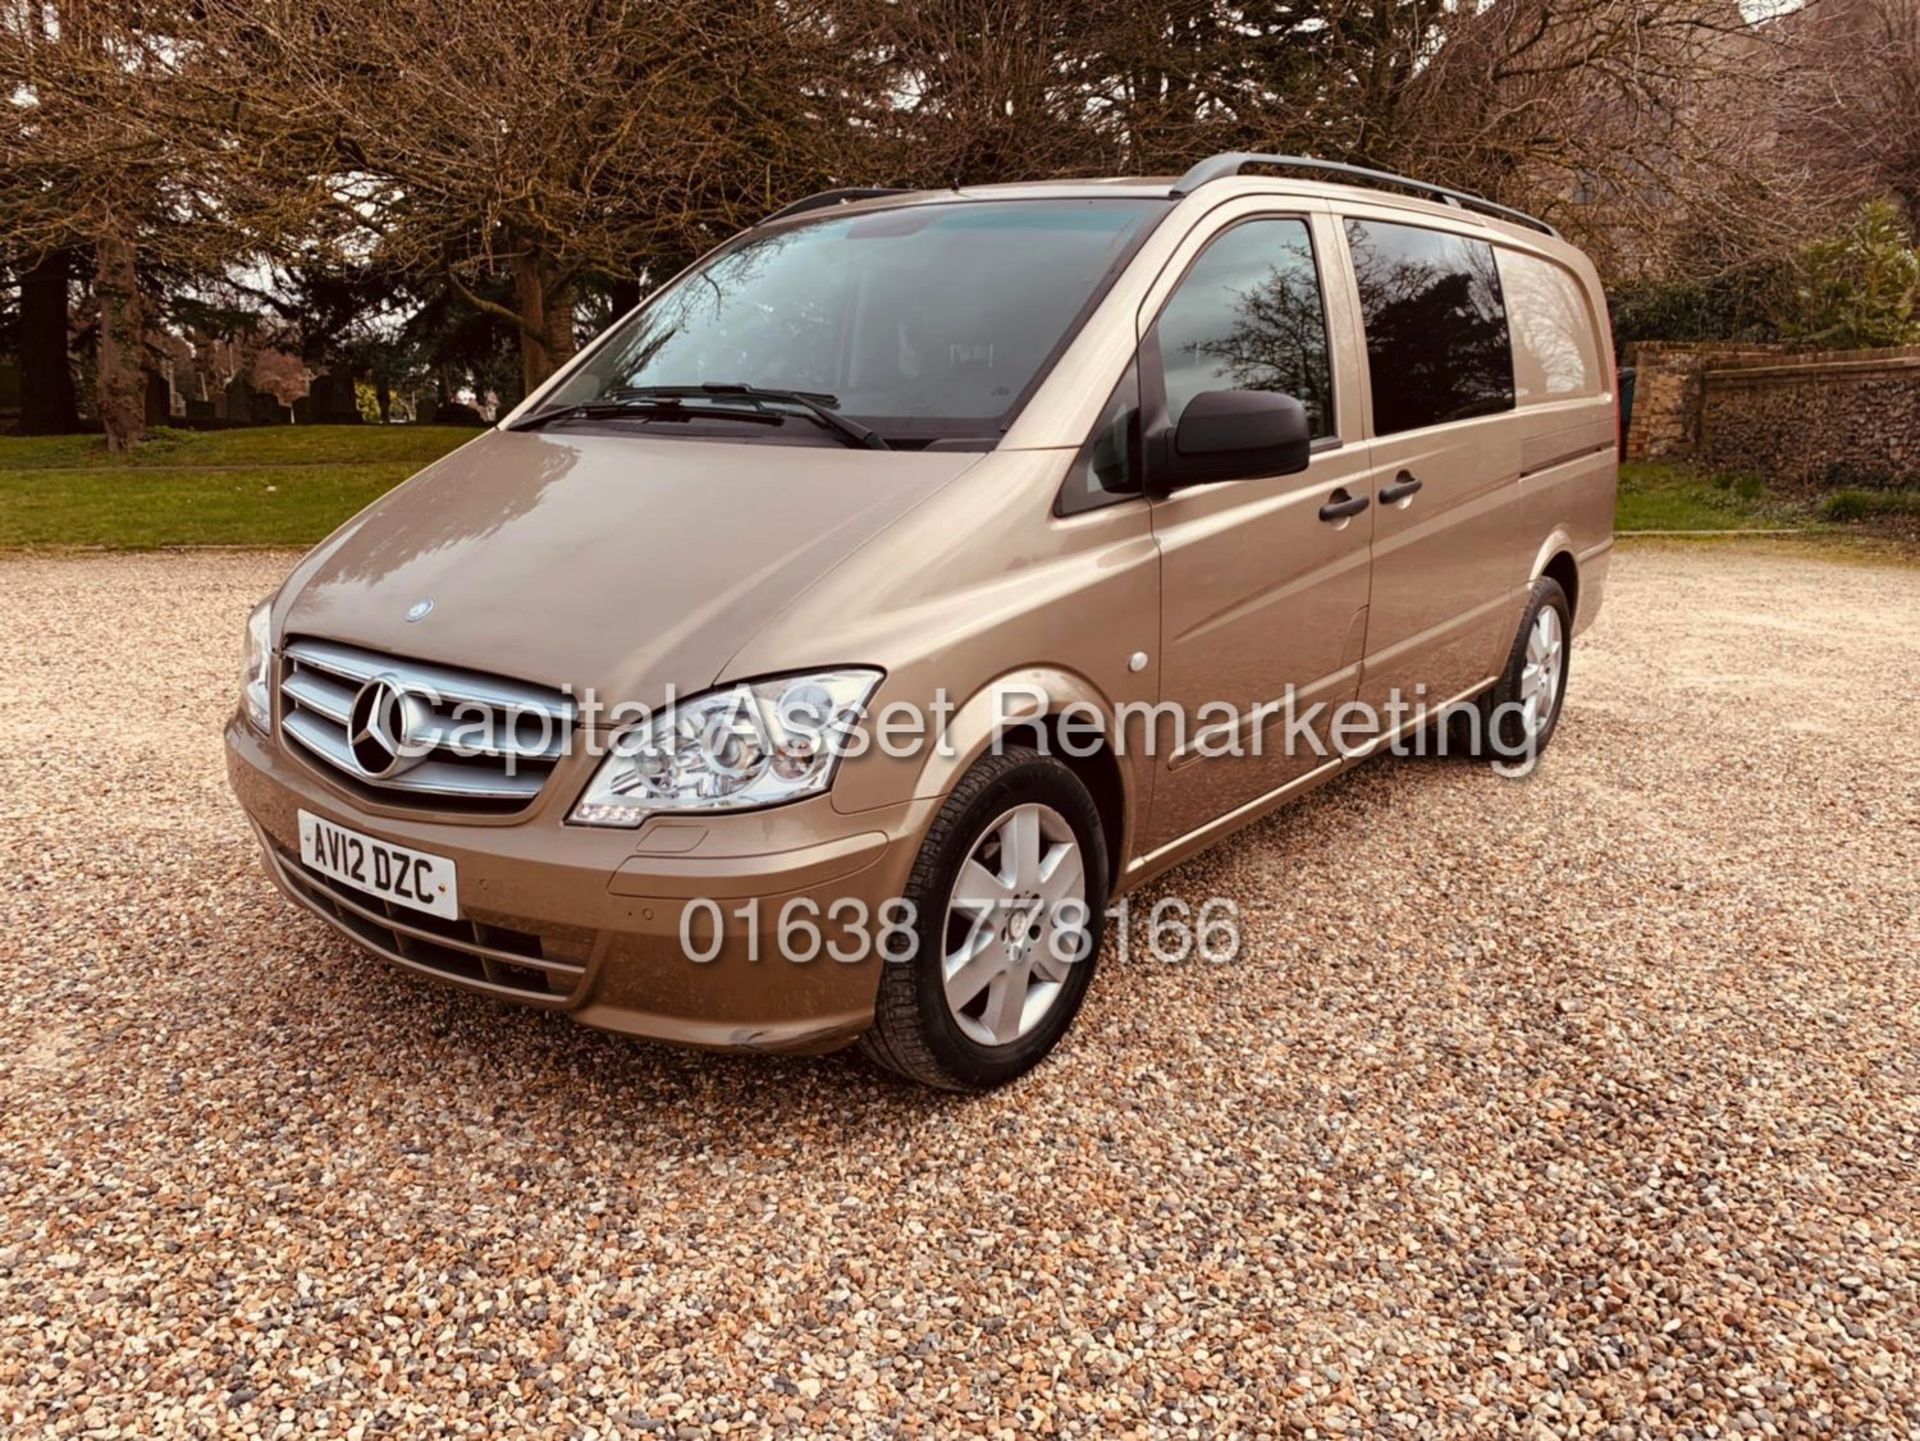 MERCEDES VITO 122CDI *SPORT-X SPEC* 8 SEATER DUALINER LWB (12 REG) 1 OWNER FSH -AIR CON-ALL THE TOYS - Image 2 of 19